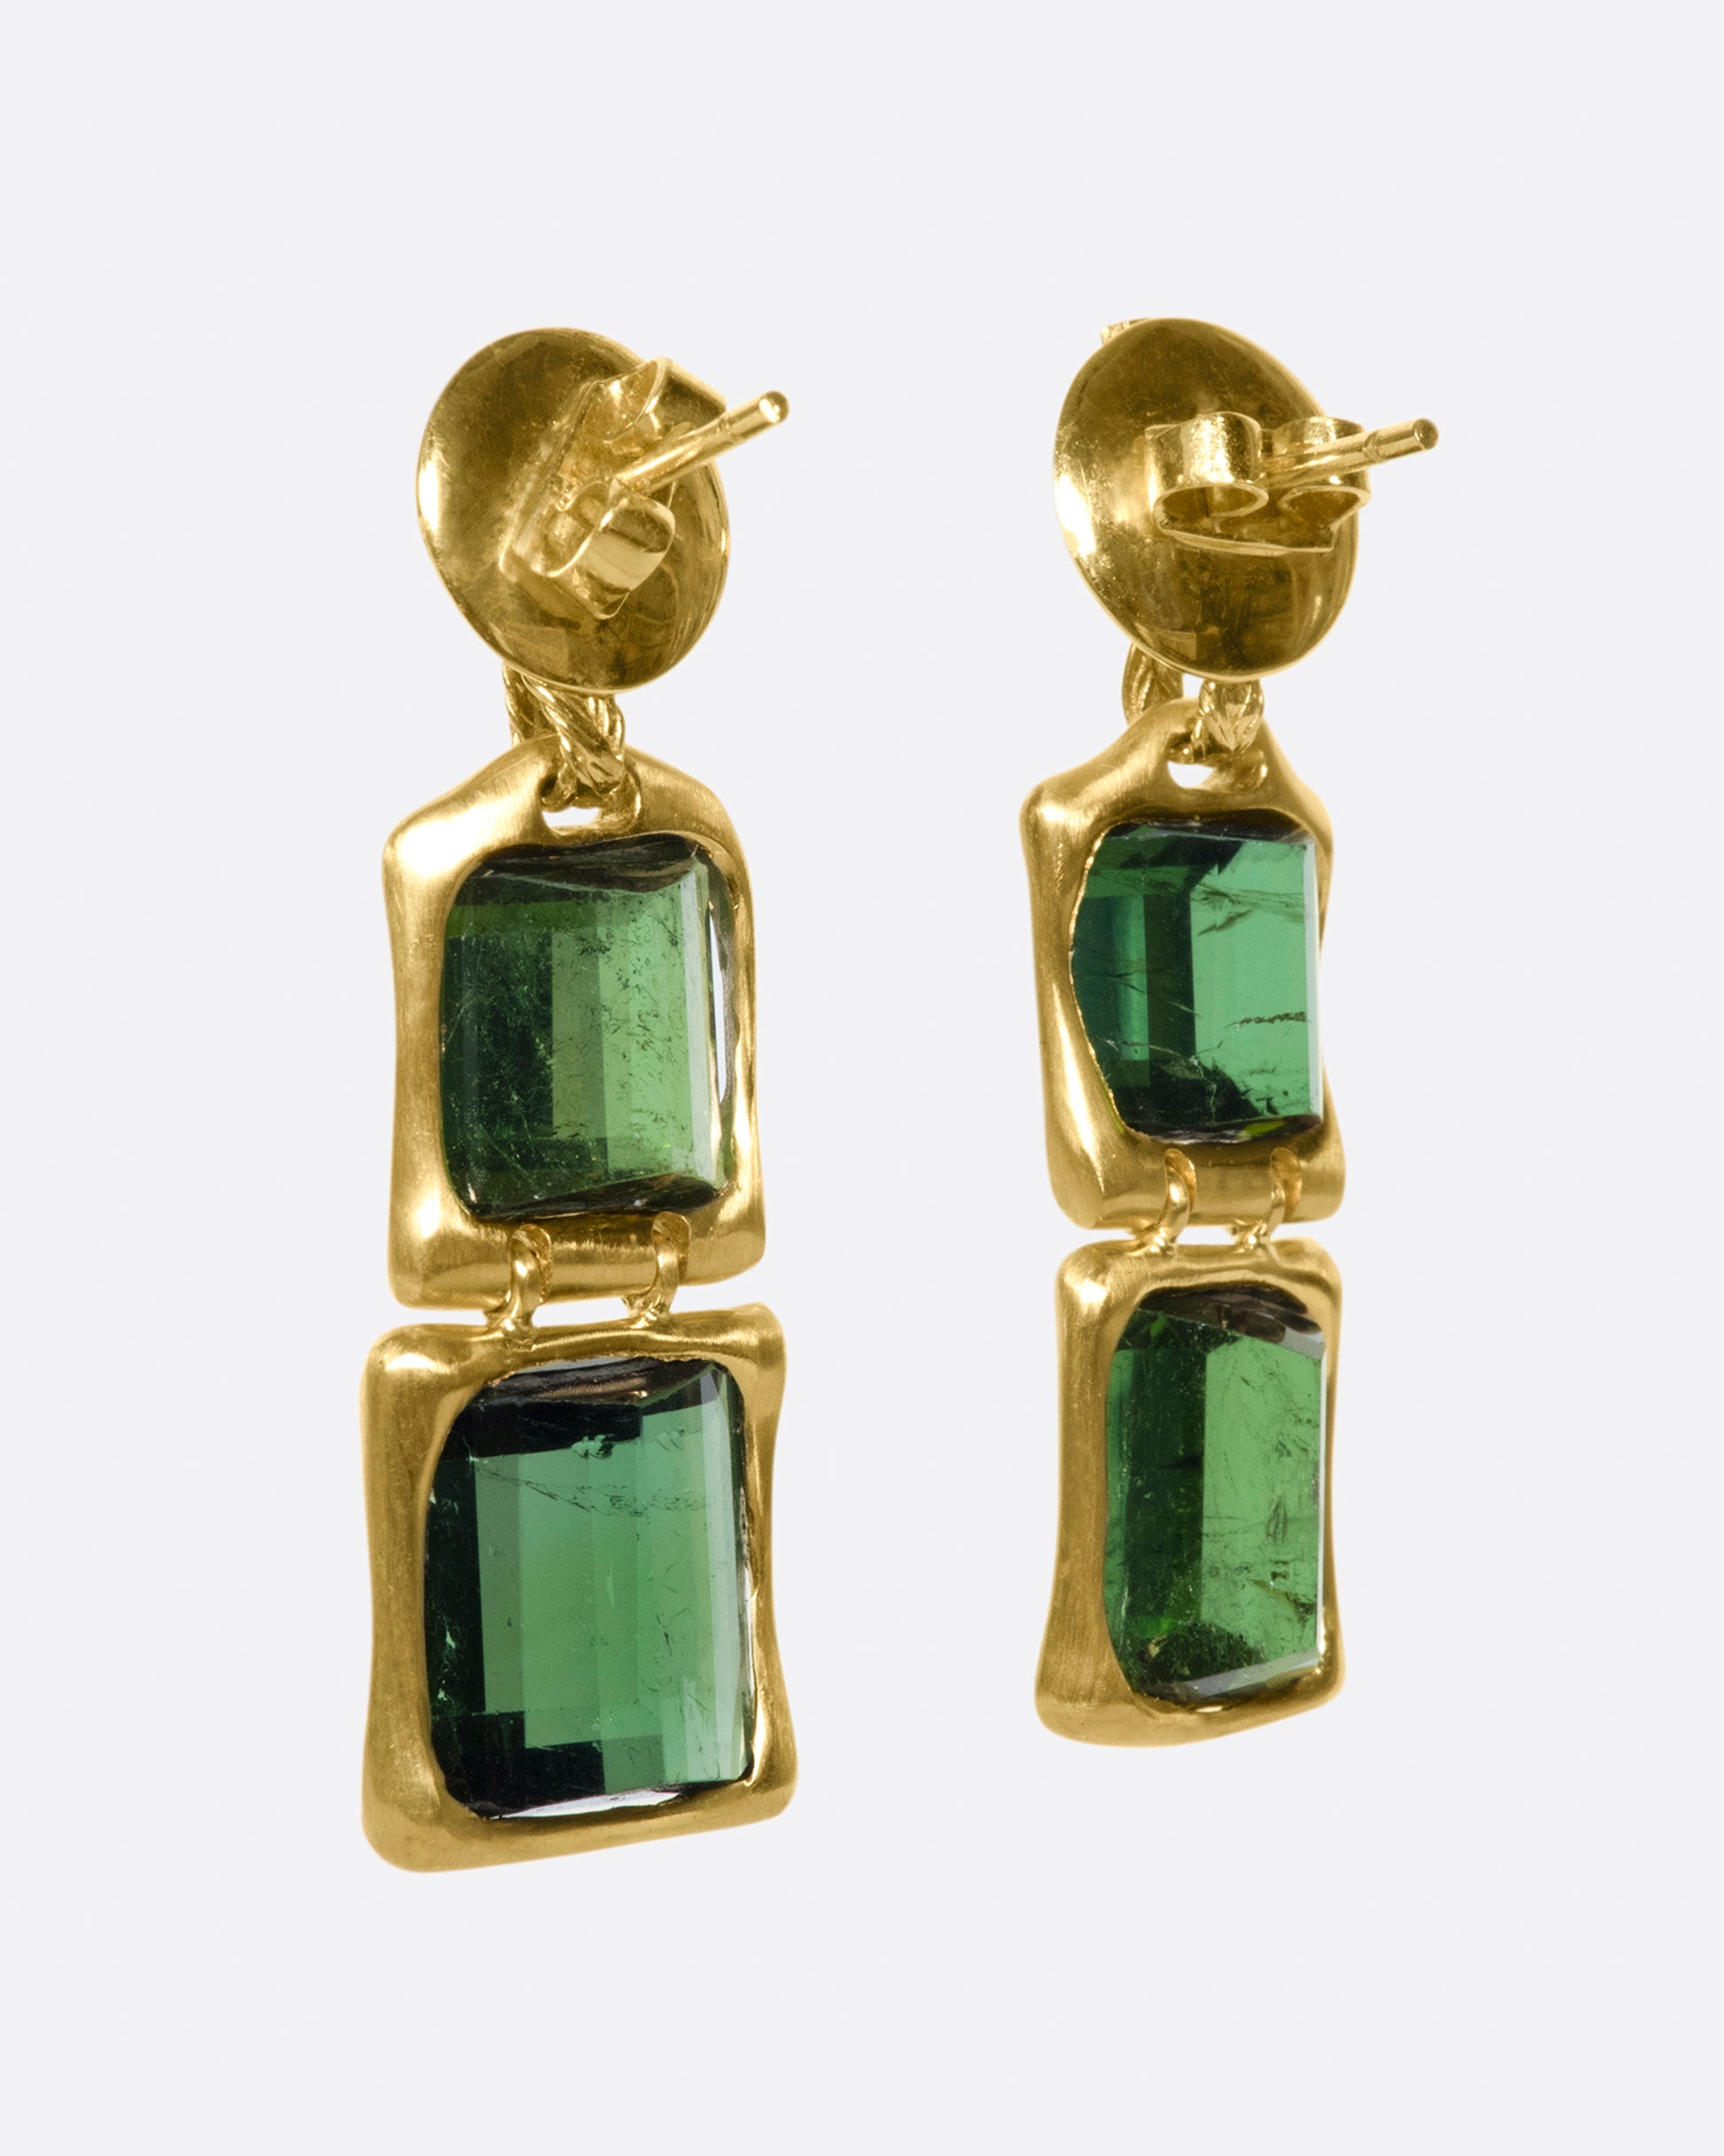 These deep green earrings are hinged between the two tourmalines, giving them some great movement and swing.